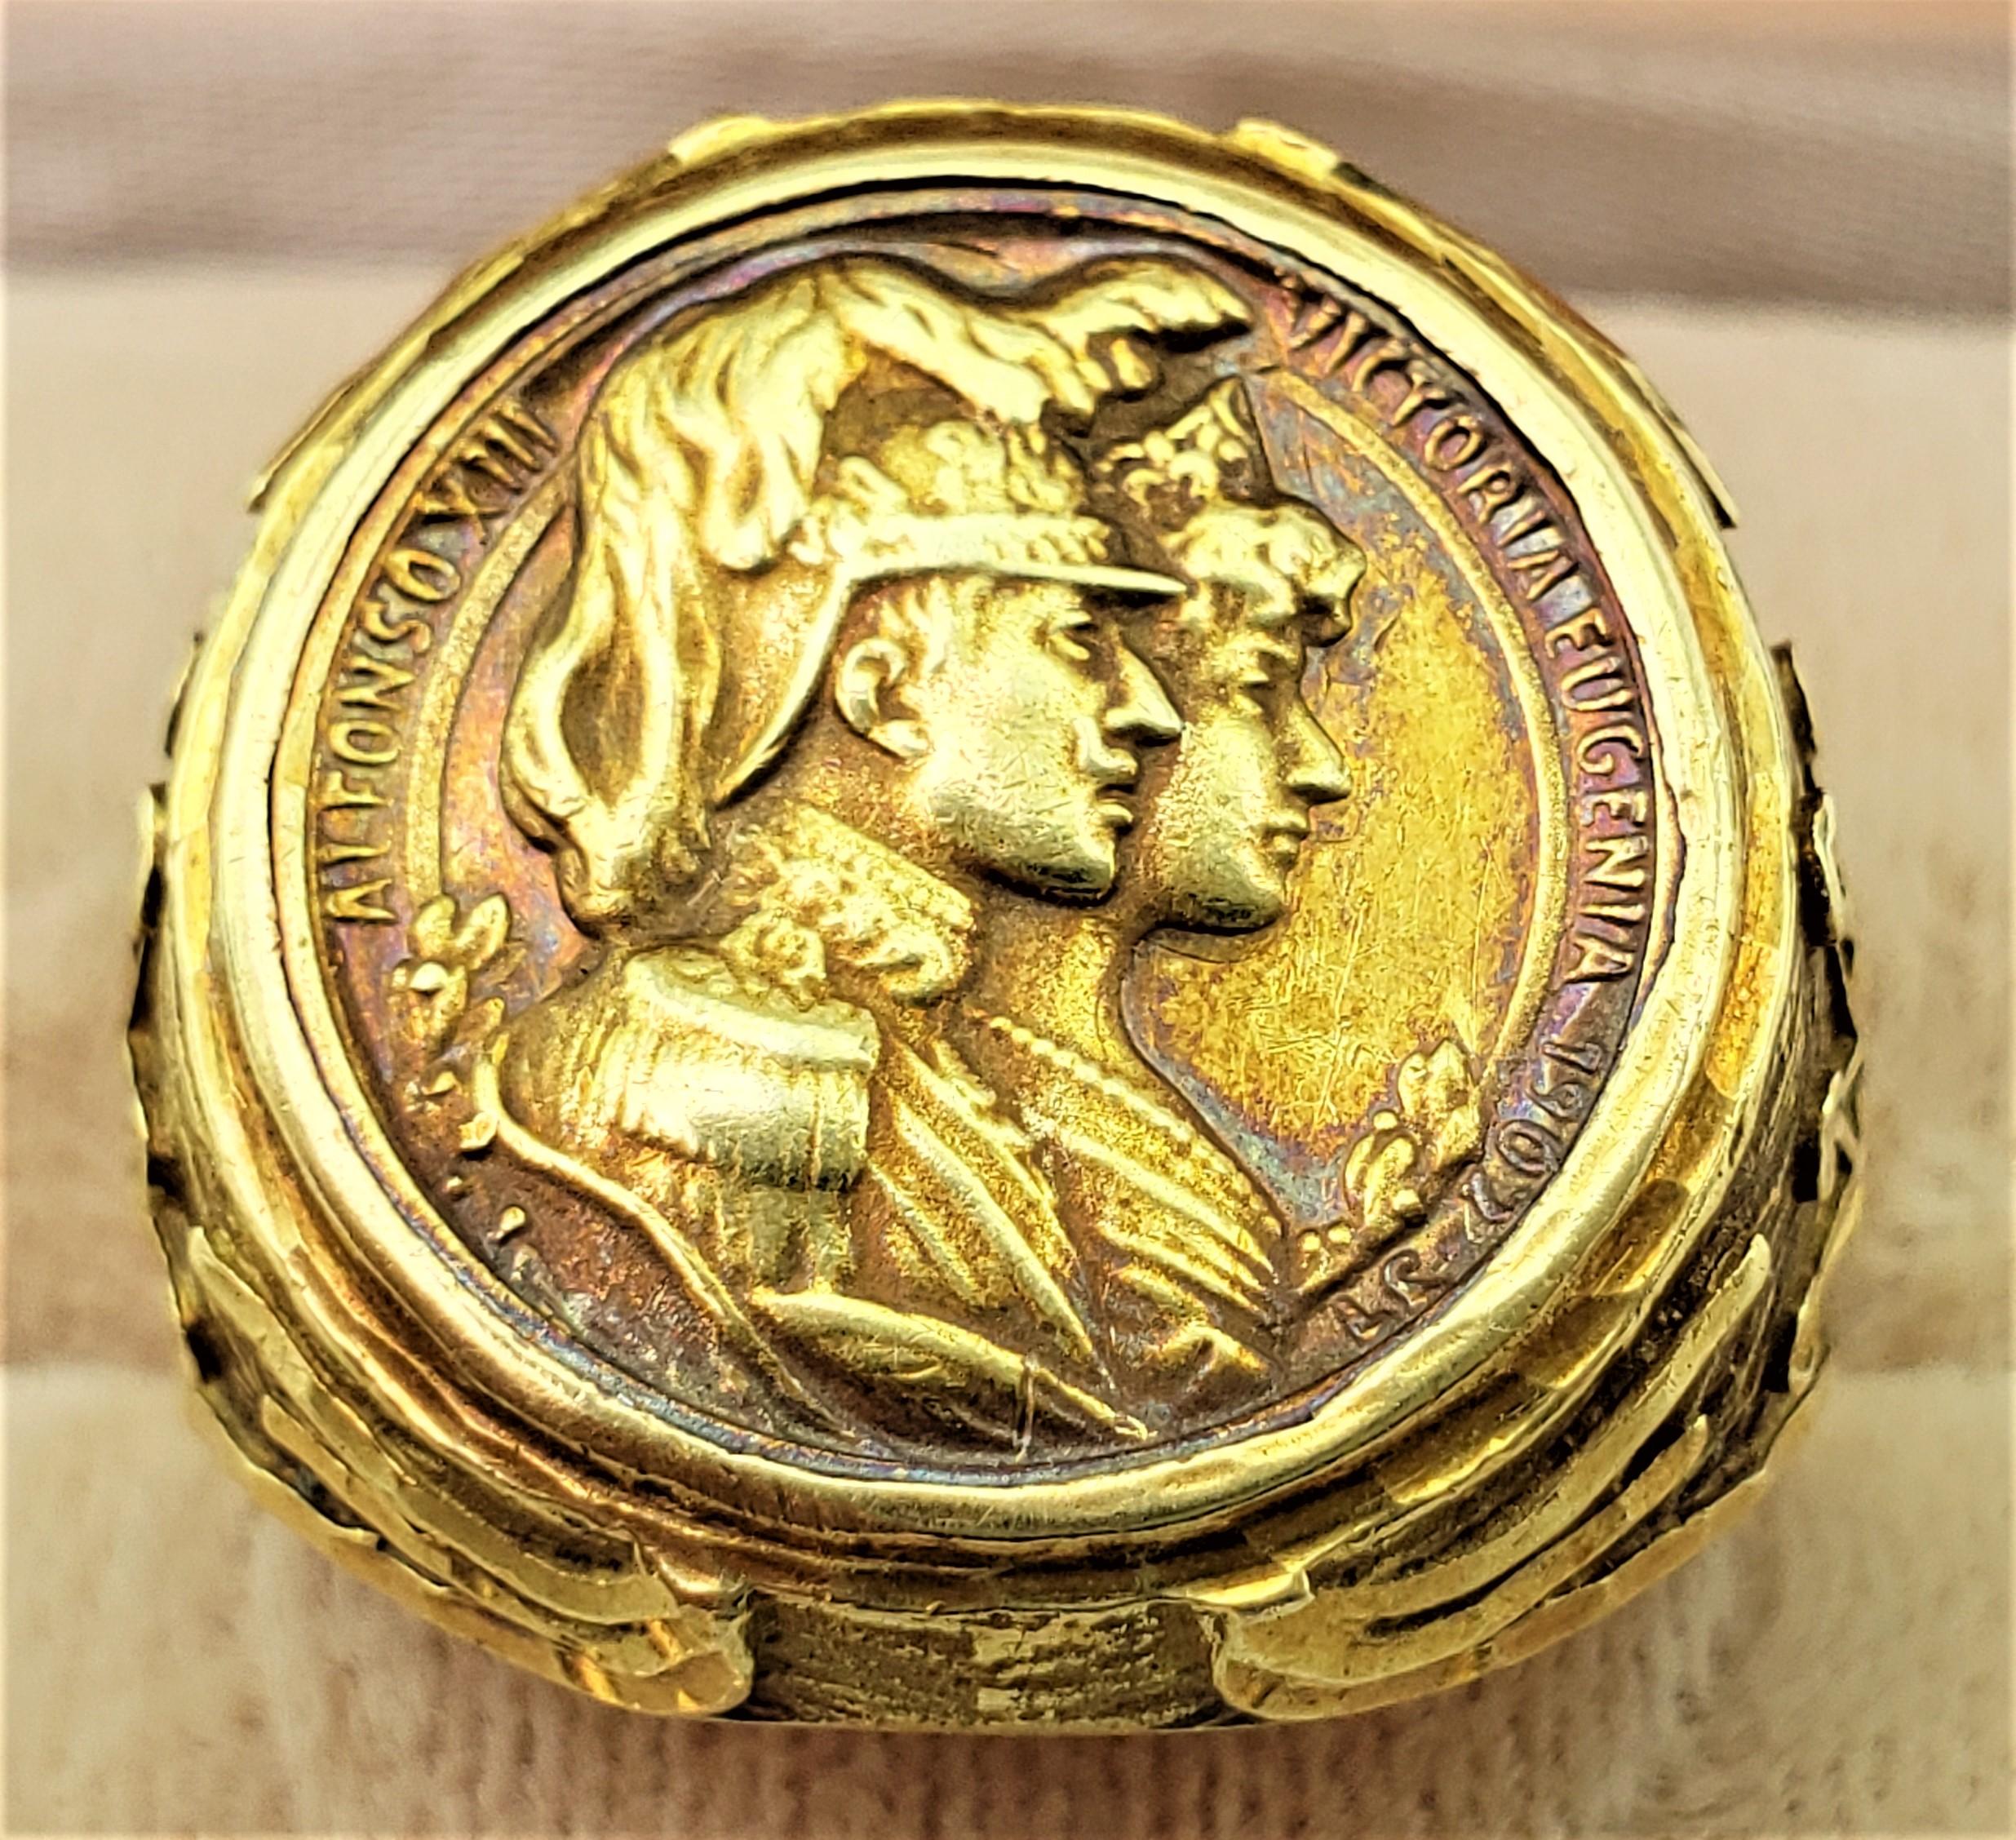 This vintage gold ring is unsigned and not marked, but believed to have originated from England and date to approximately 1935. The ring tests for a minimum of eighteen karat yellow gold and has an inset medallion of King Alphonso XIII and Queen